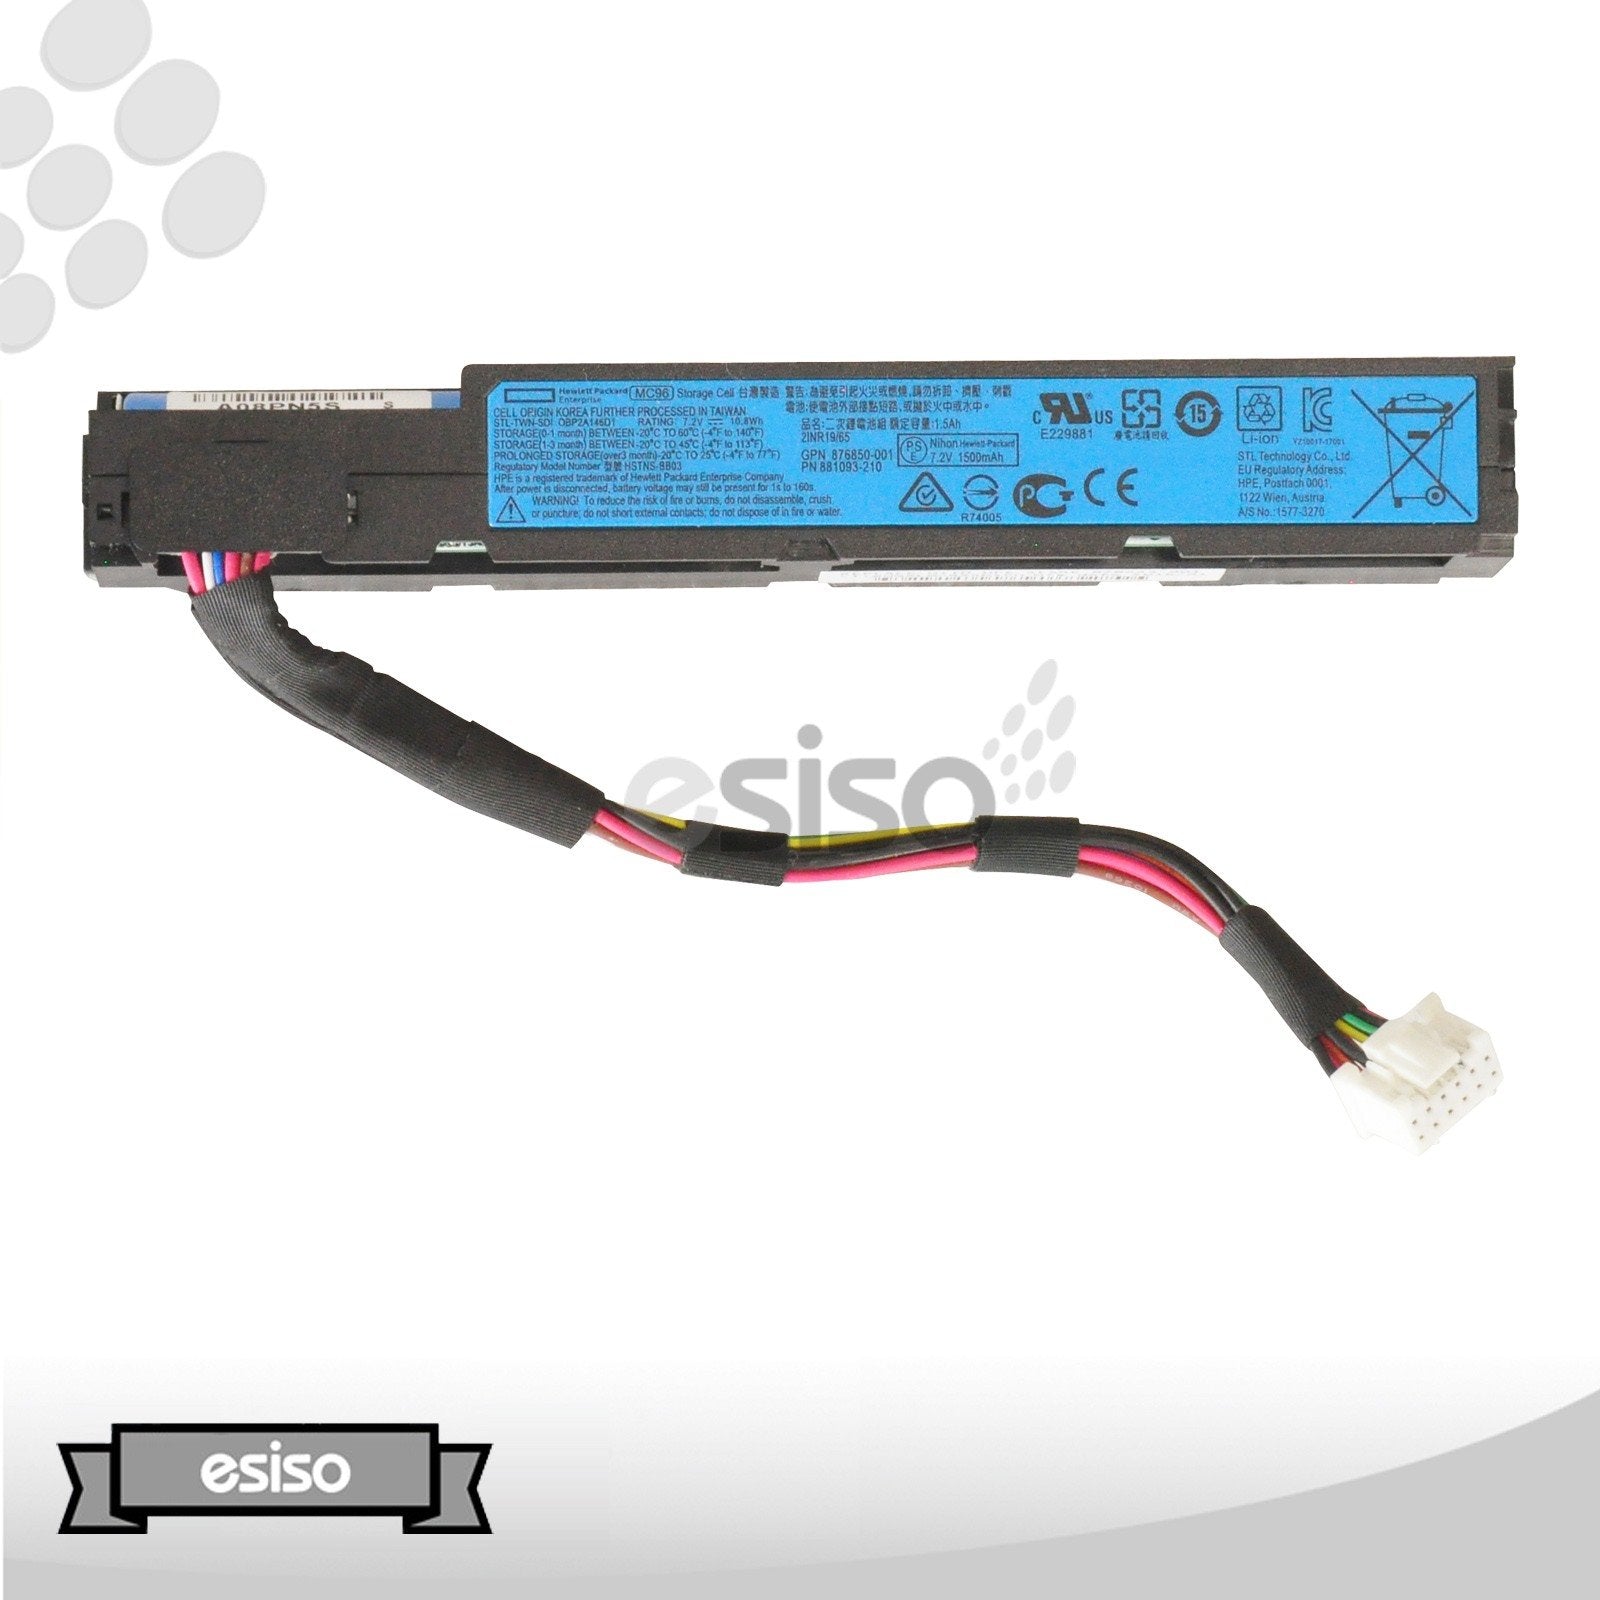 878643-001 HPE 96W SMART ARRAY CONTROLLER BATTERY MODULE WITH 145MM CABLE